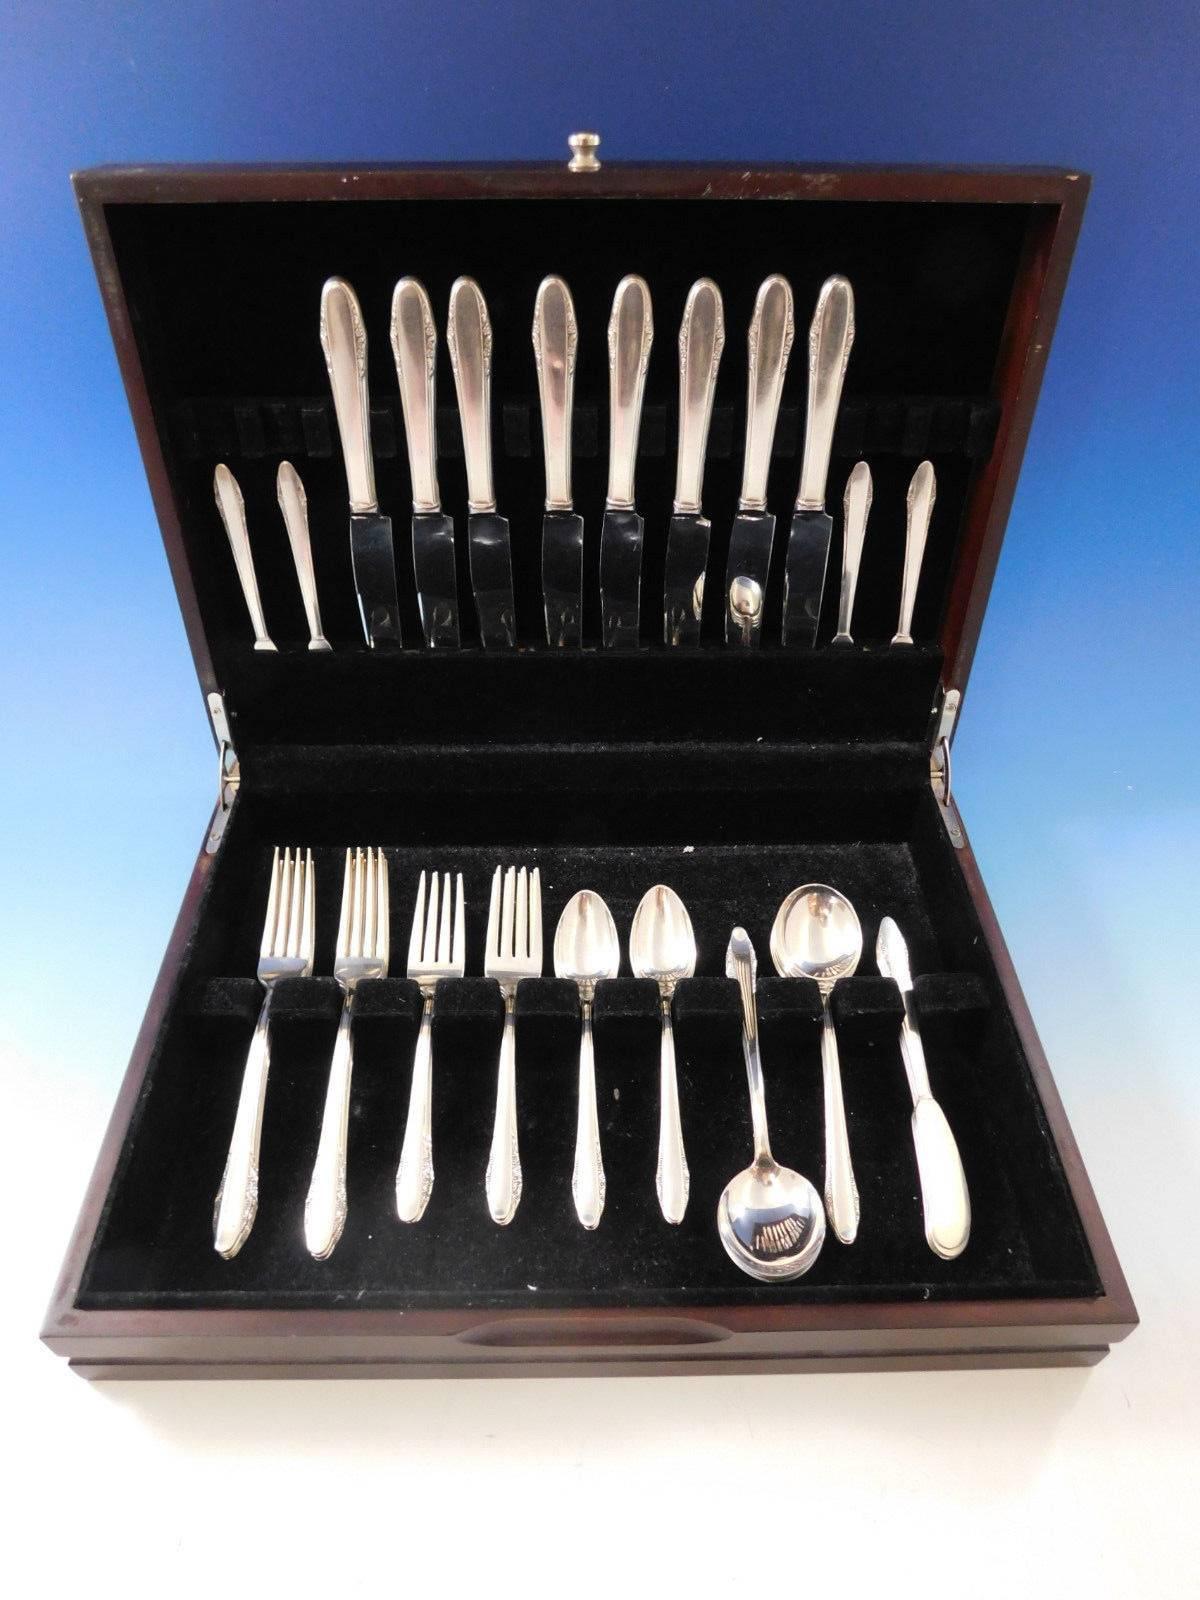 Festival by Lunt circa 1936 sterling silver flatware set, 48 pieces. This set includes:

Eight knives, 8 7/8